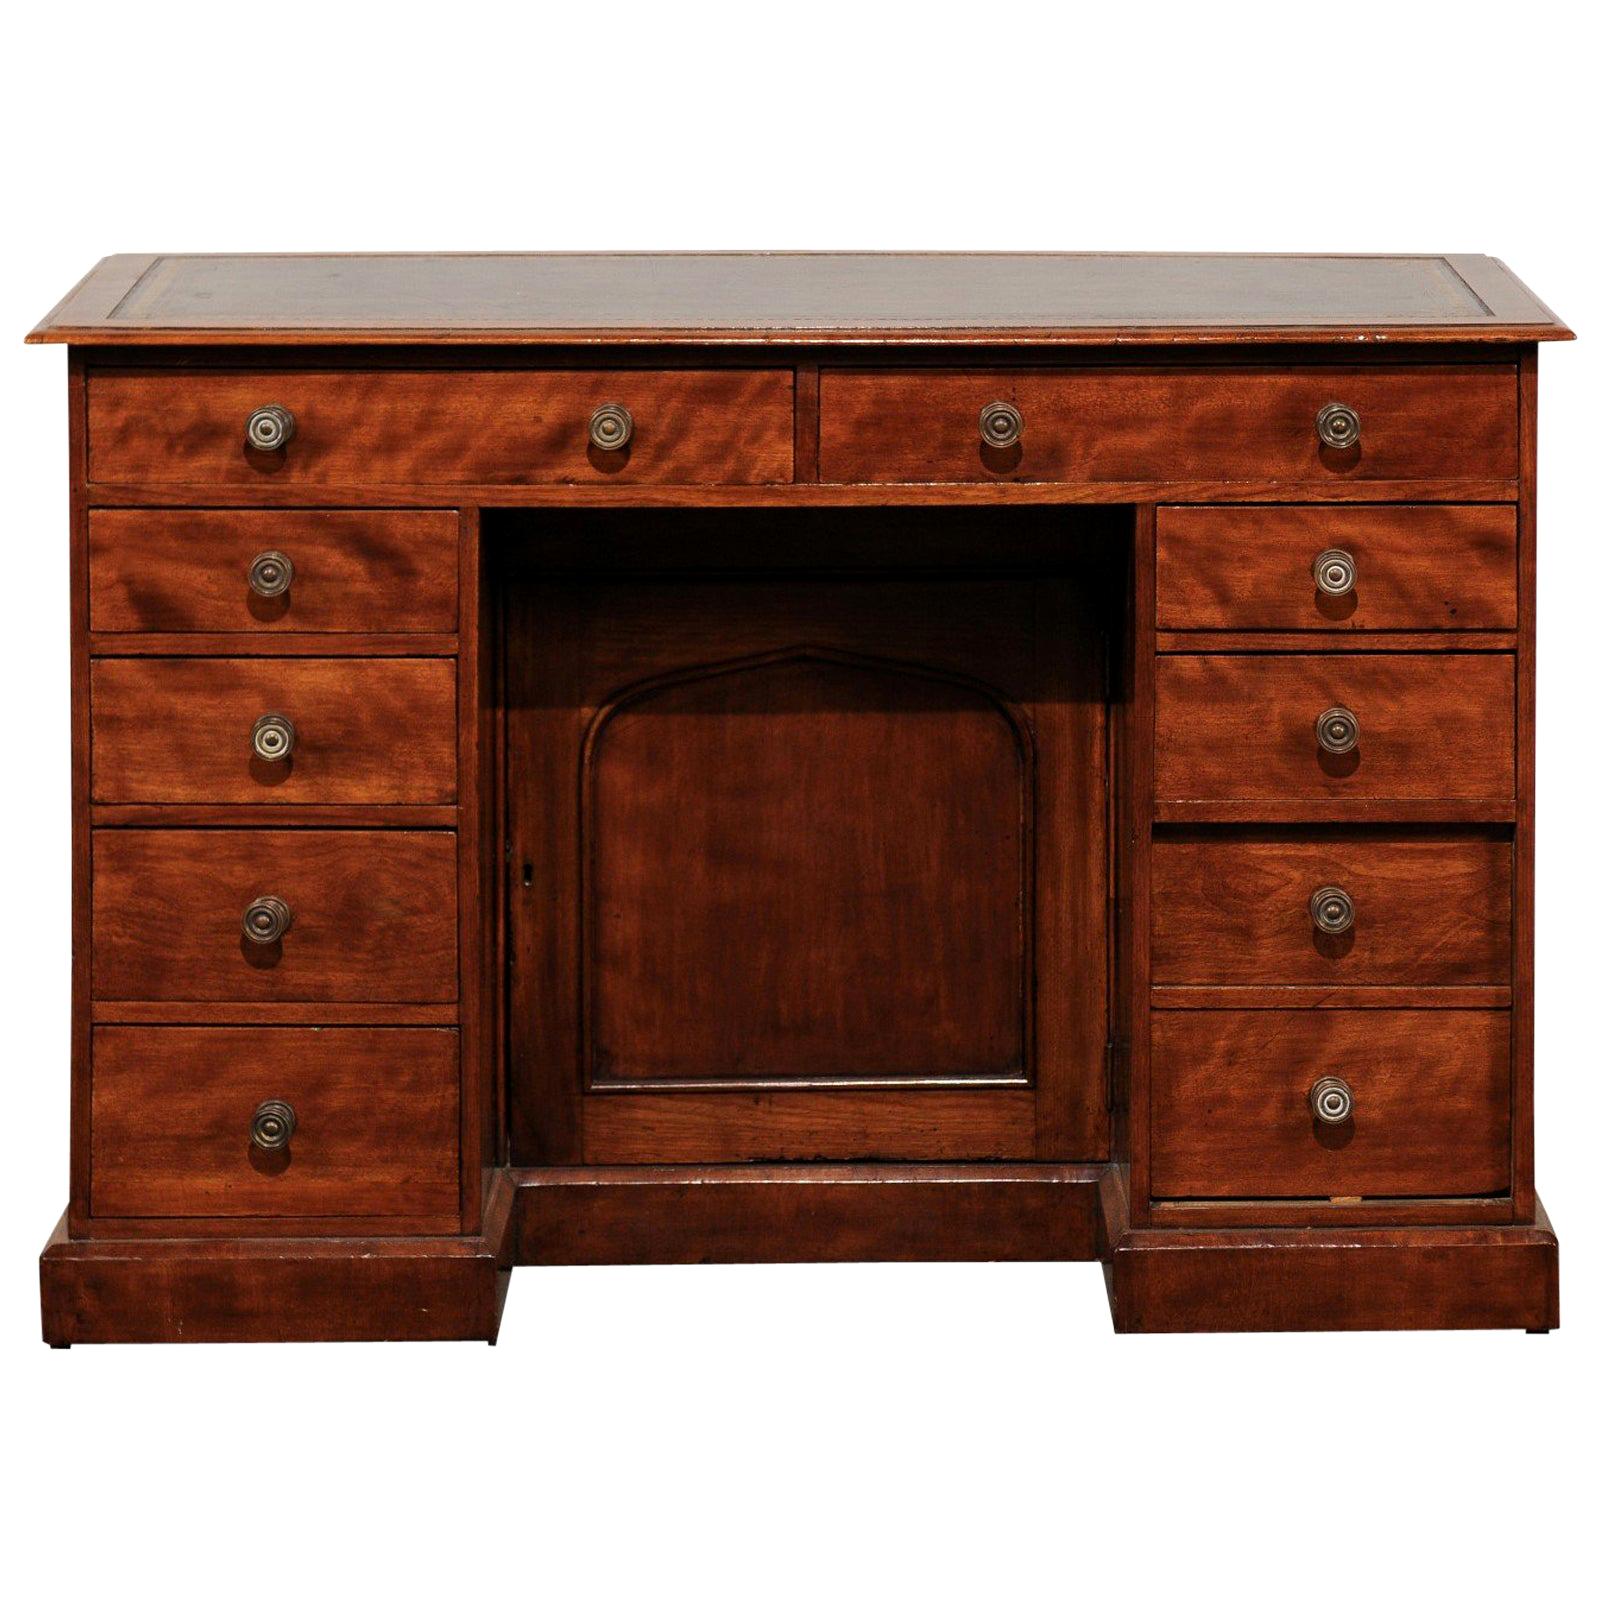 19th Century English Mahogany Knee-Hole Desk, Leather Top For Sale